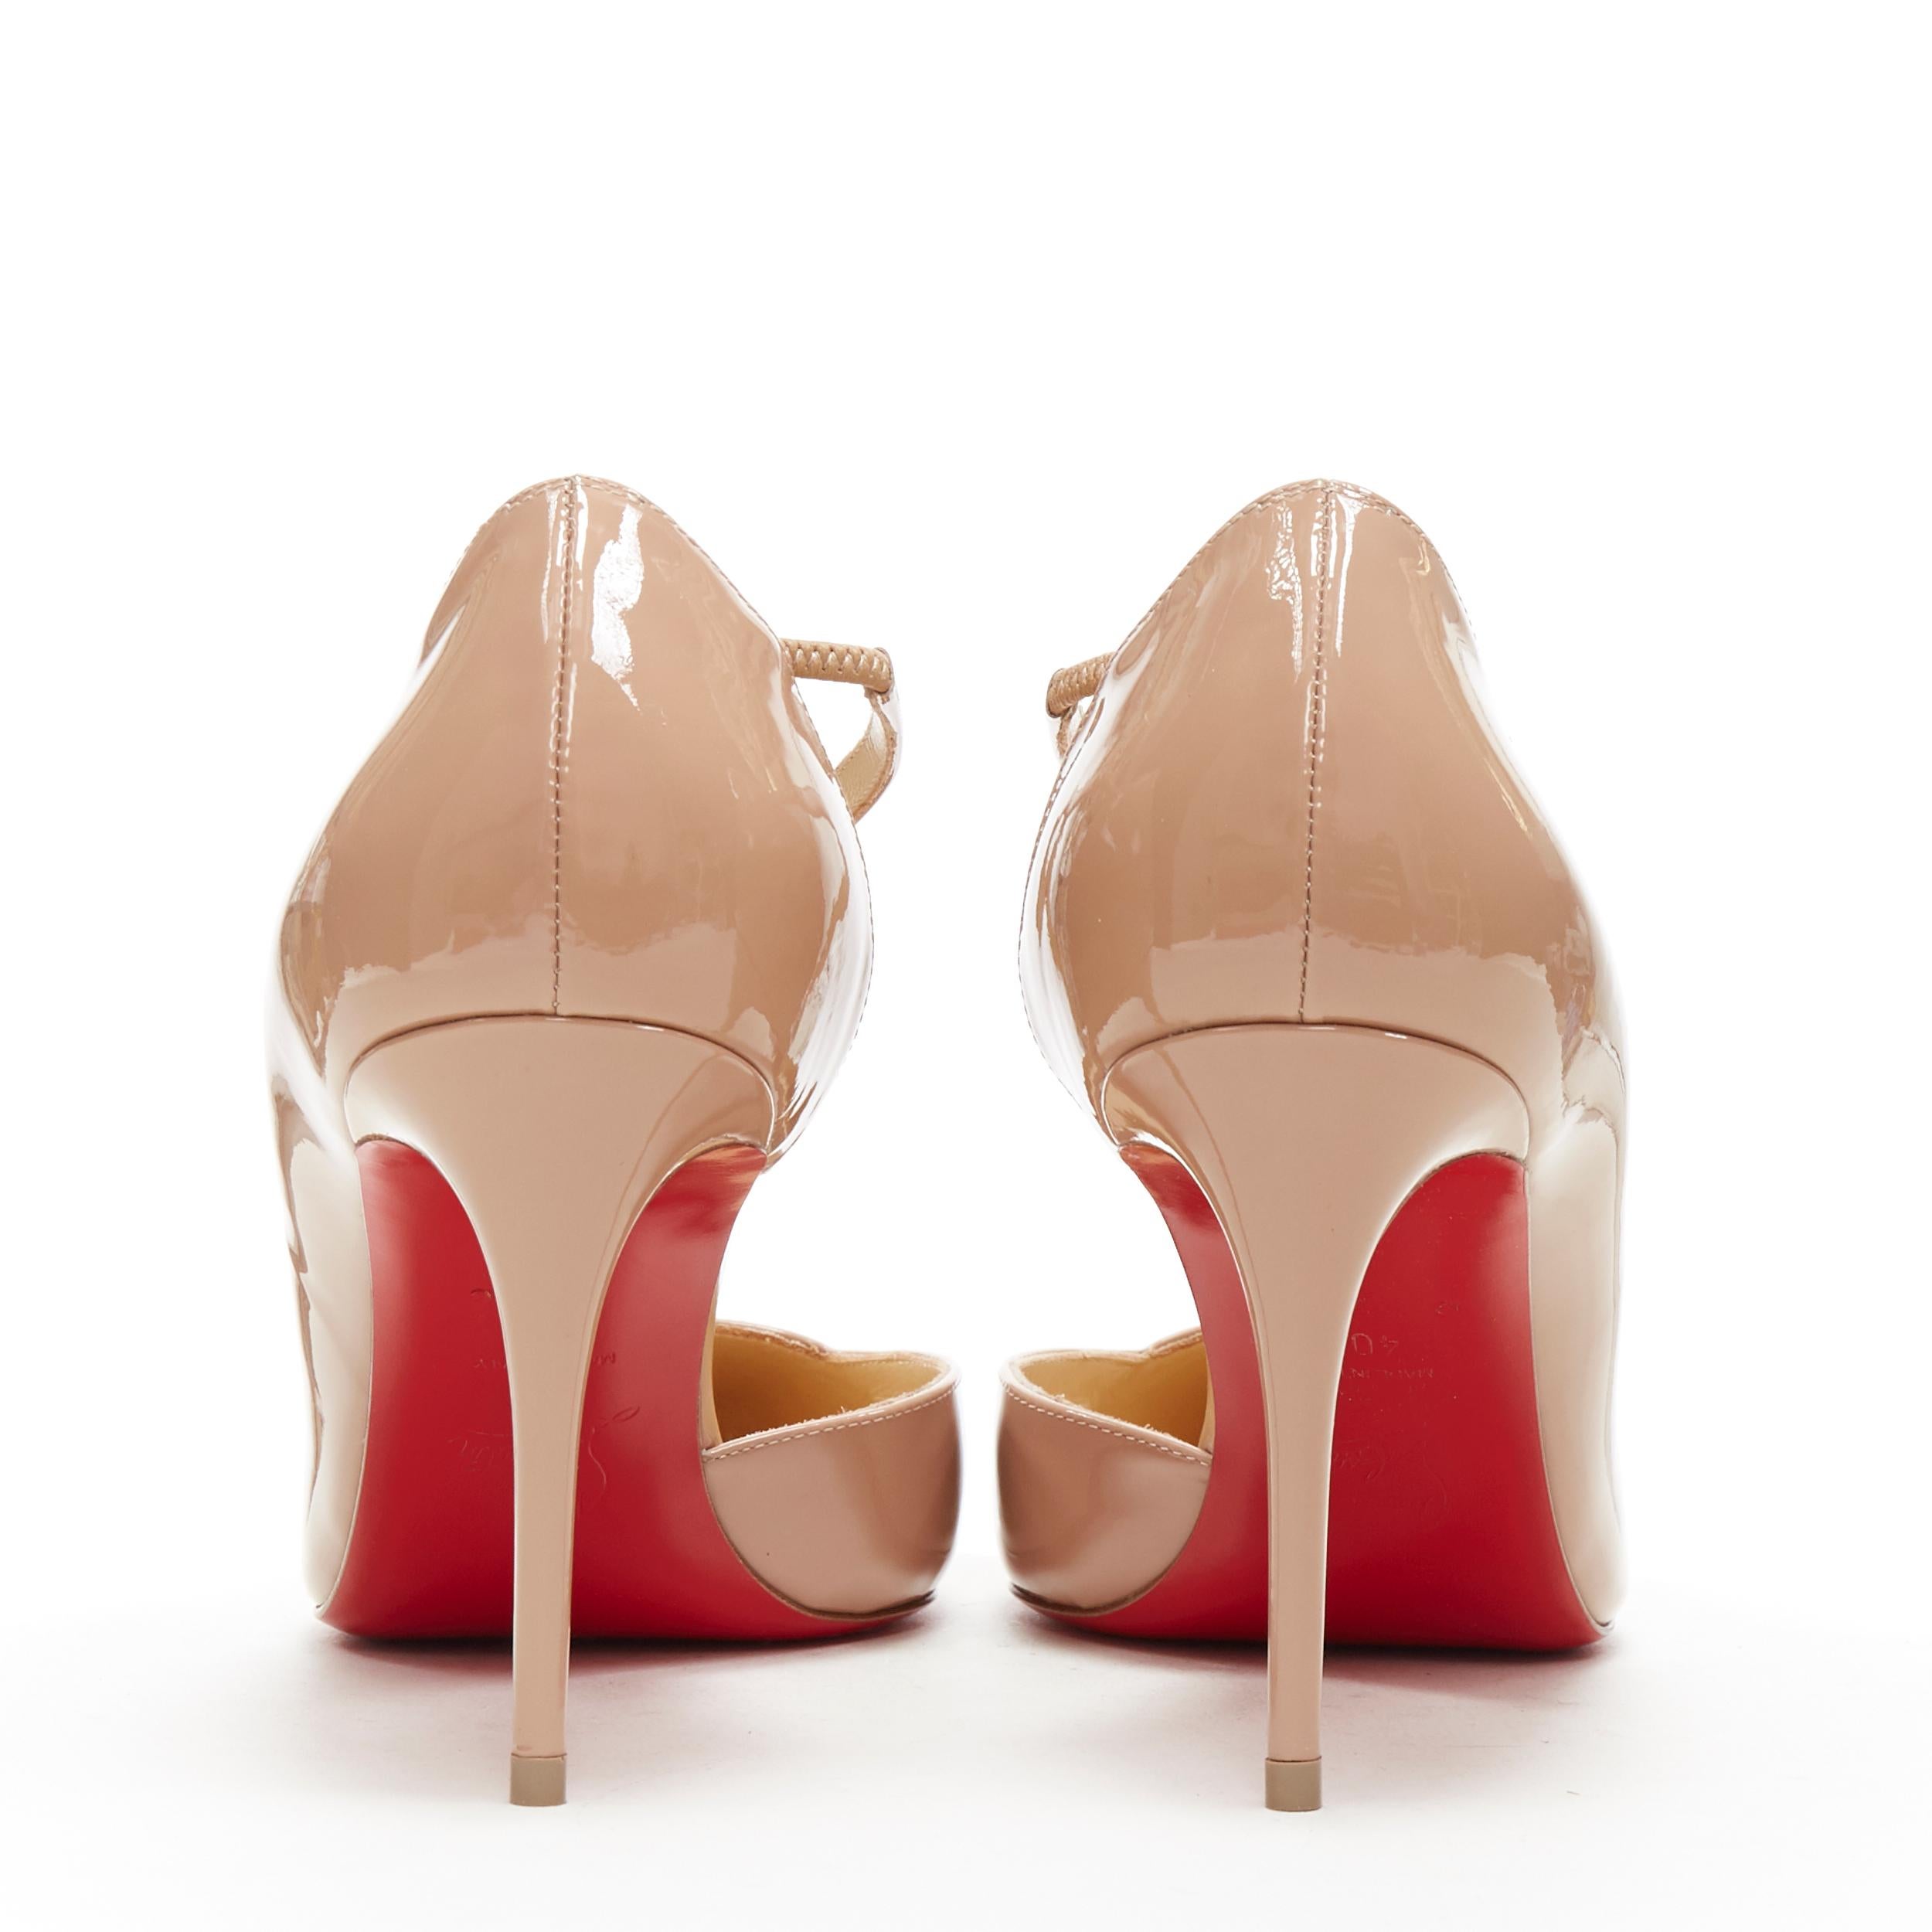 Beige new CHRISTIAN LOUBOUTIN Jumping 85 nude patent crossover strap pump EU40.5